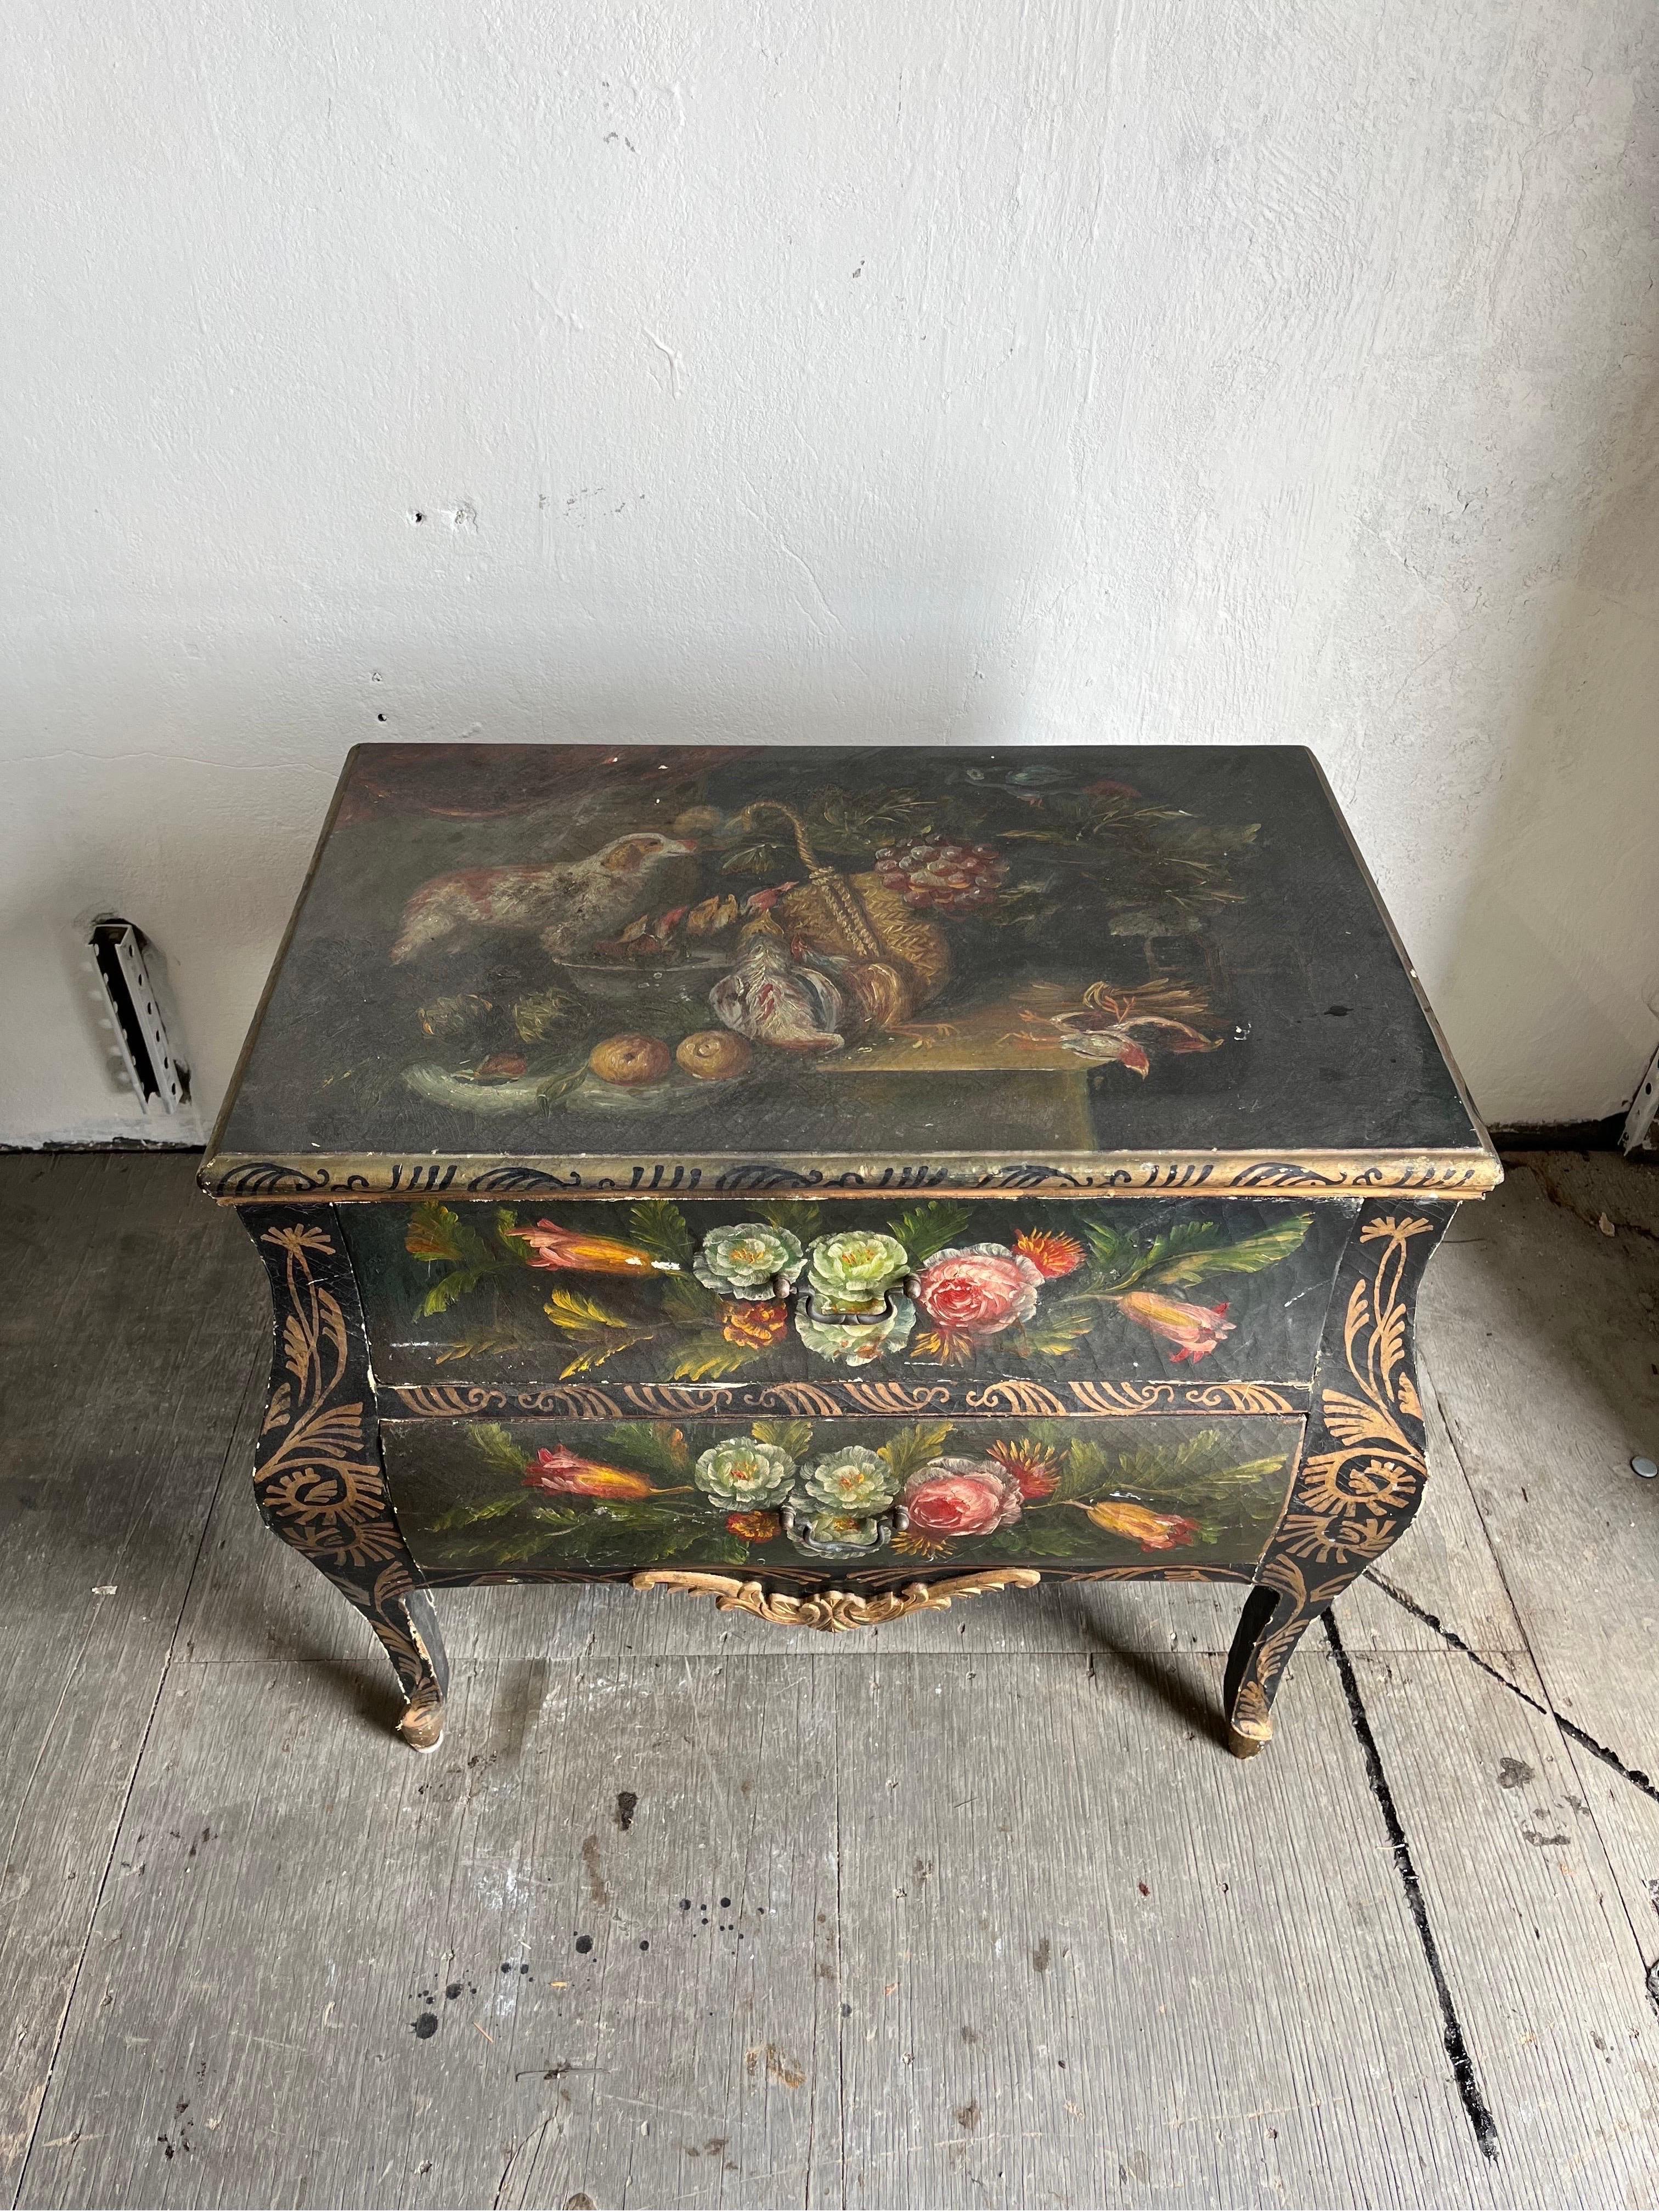 Unique Linen wrapped Bombe Chest. Two sided drawers. Period paintings on all sides and tip. Brass drawer pulls.

Curbside to NYC/Philly $350